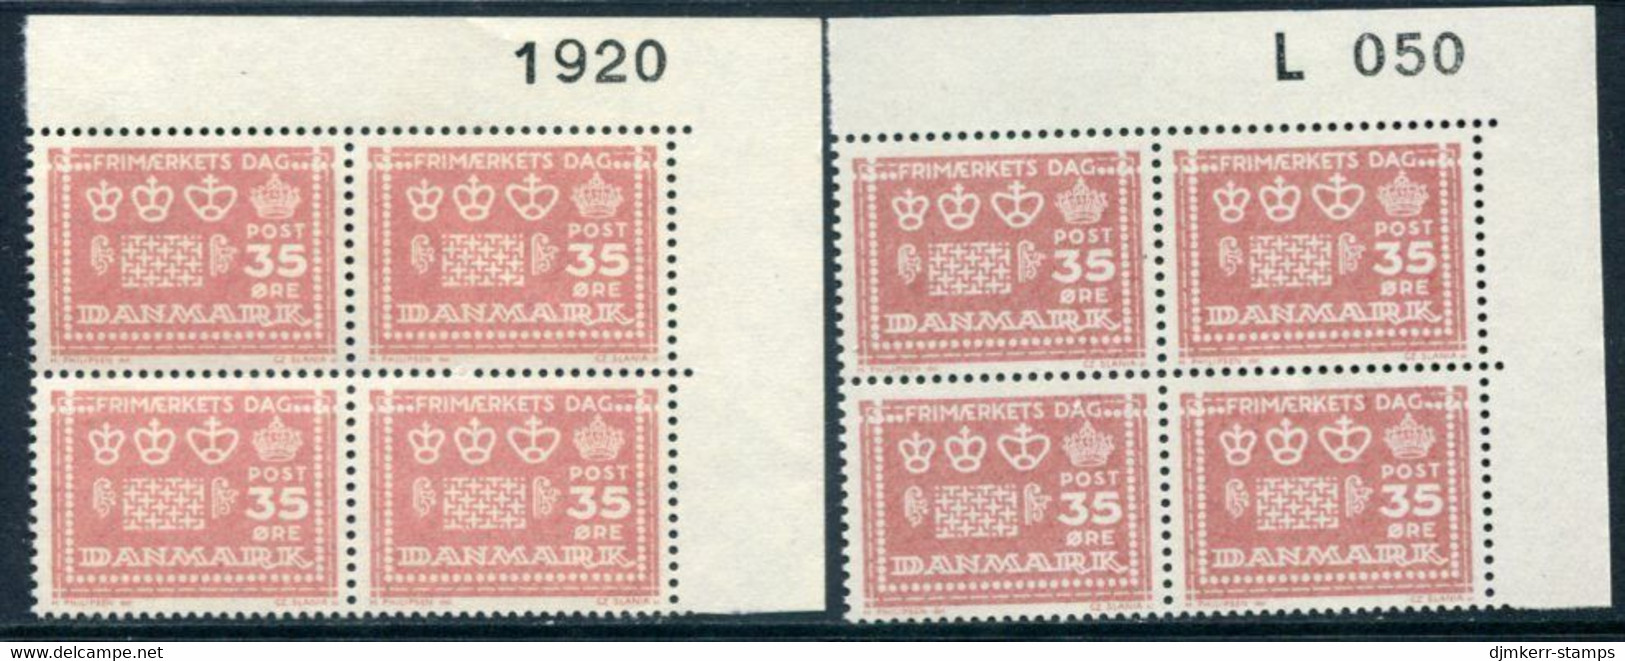 DENMARK 1964 Stamp Day Both Papers In Blocks Of 4 With Control Number MNH / **. Michel 424x,y - Nuovi